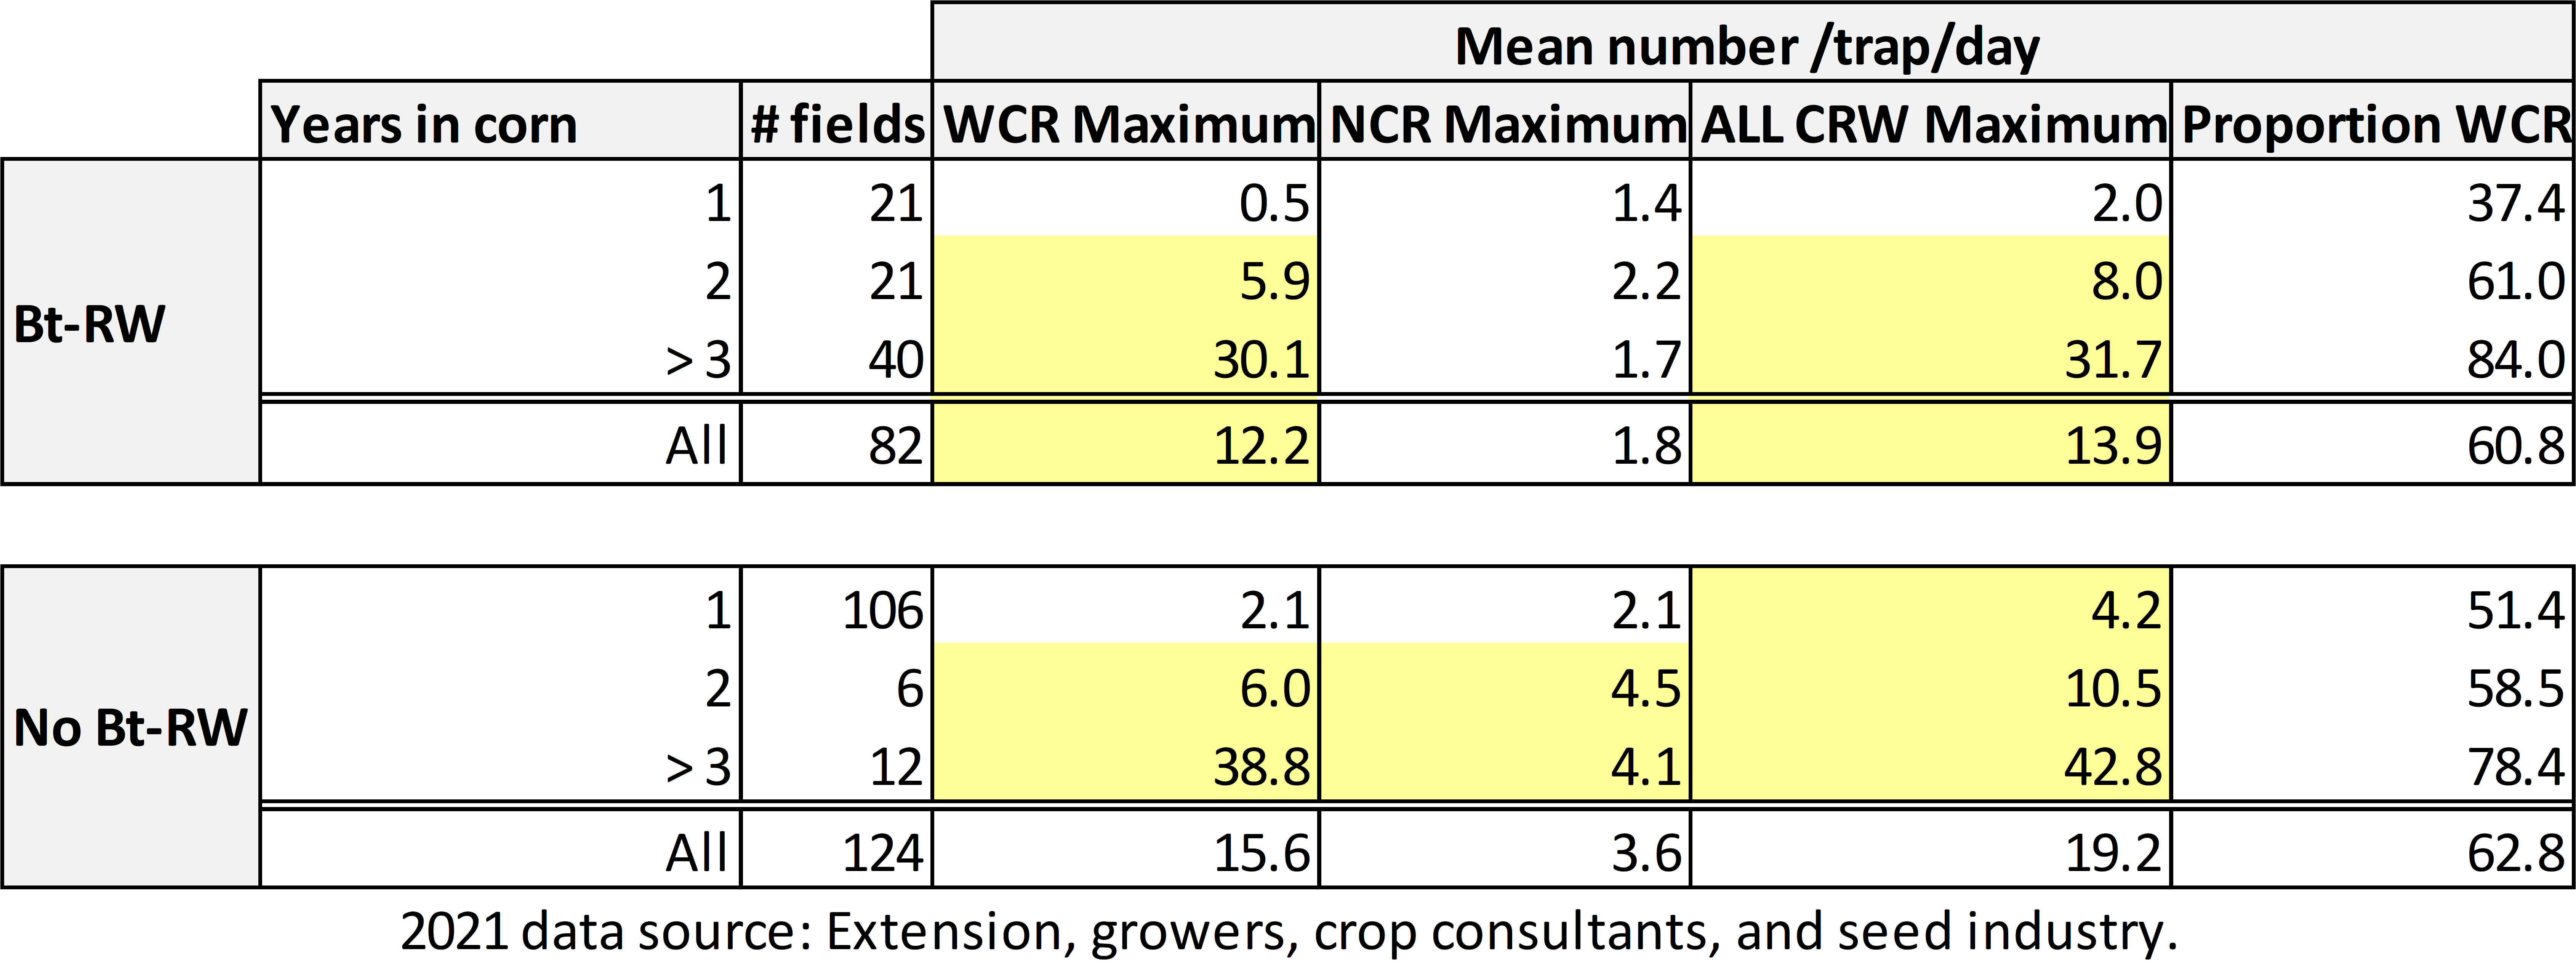 2021 Data source: Extension, growers, crop consultants and seed industry